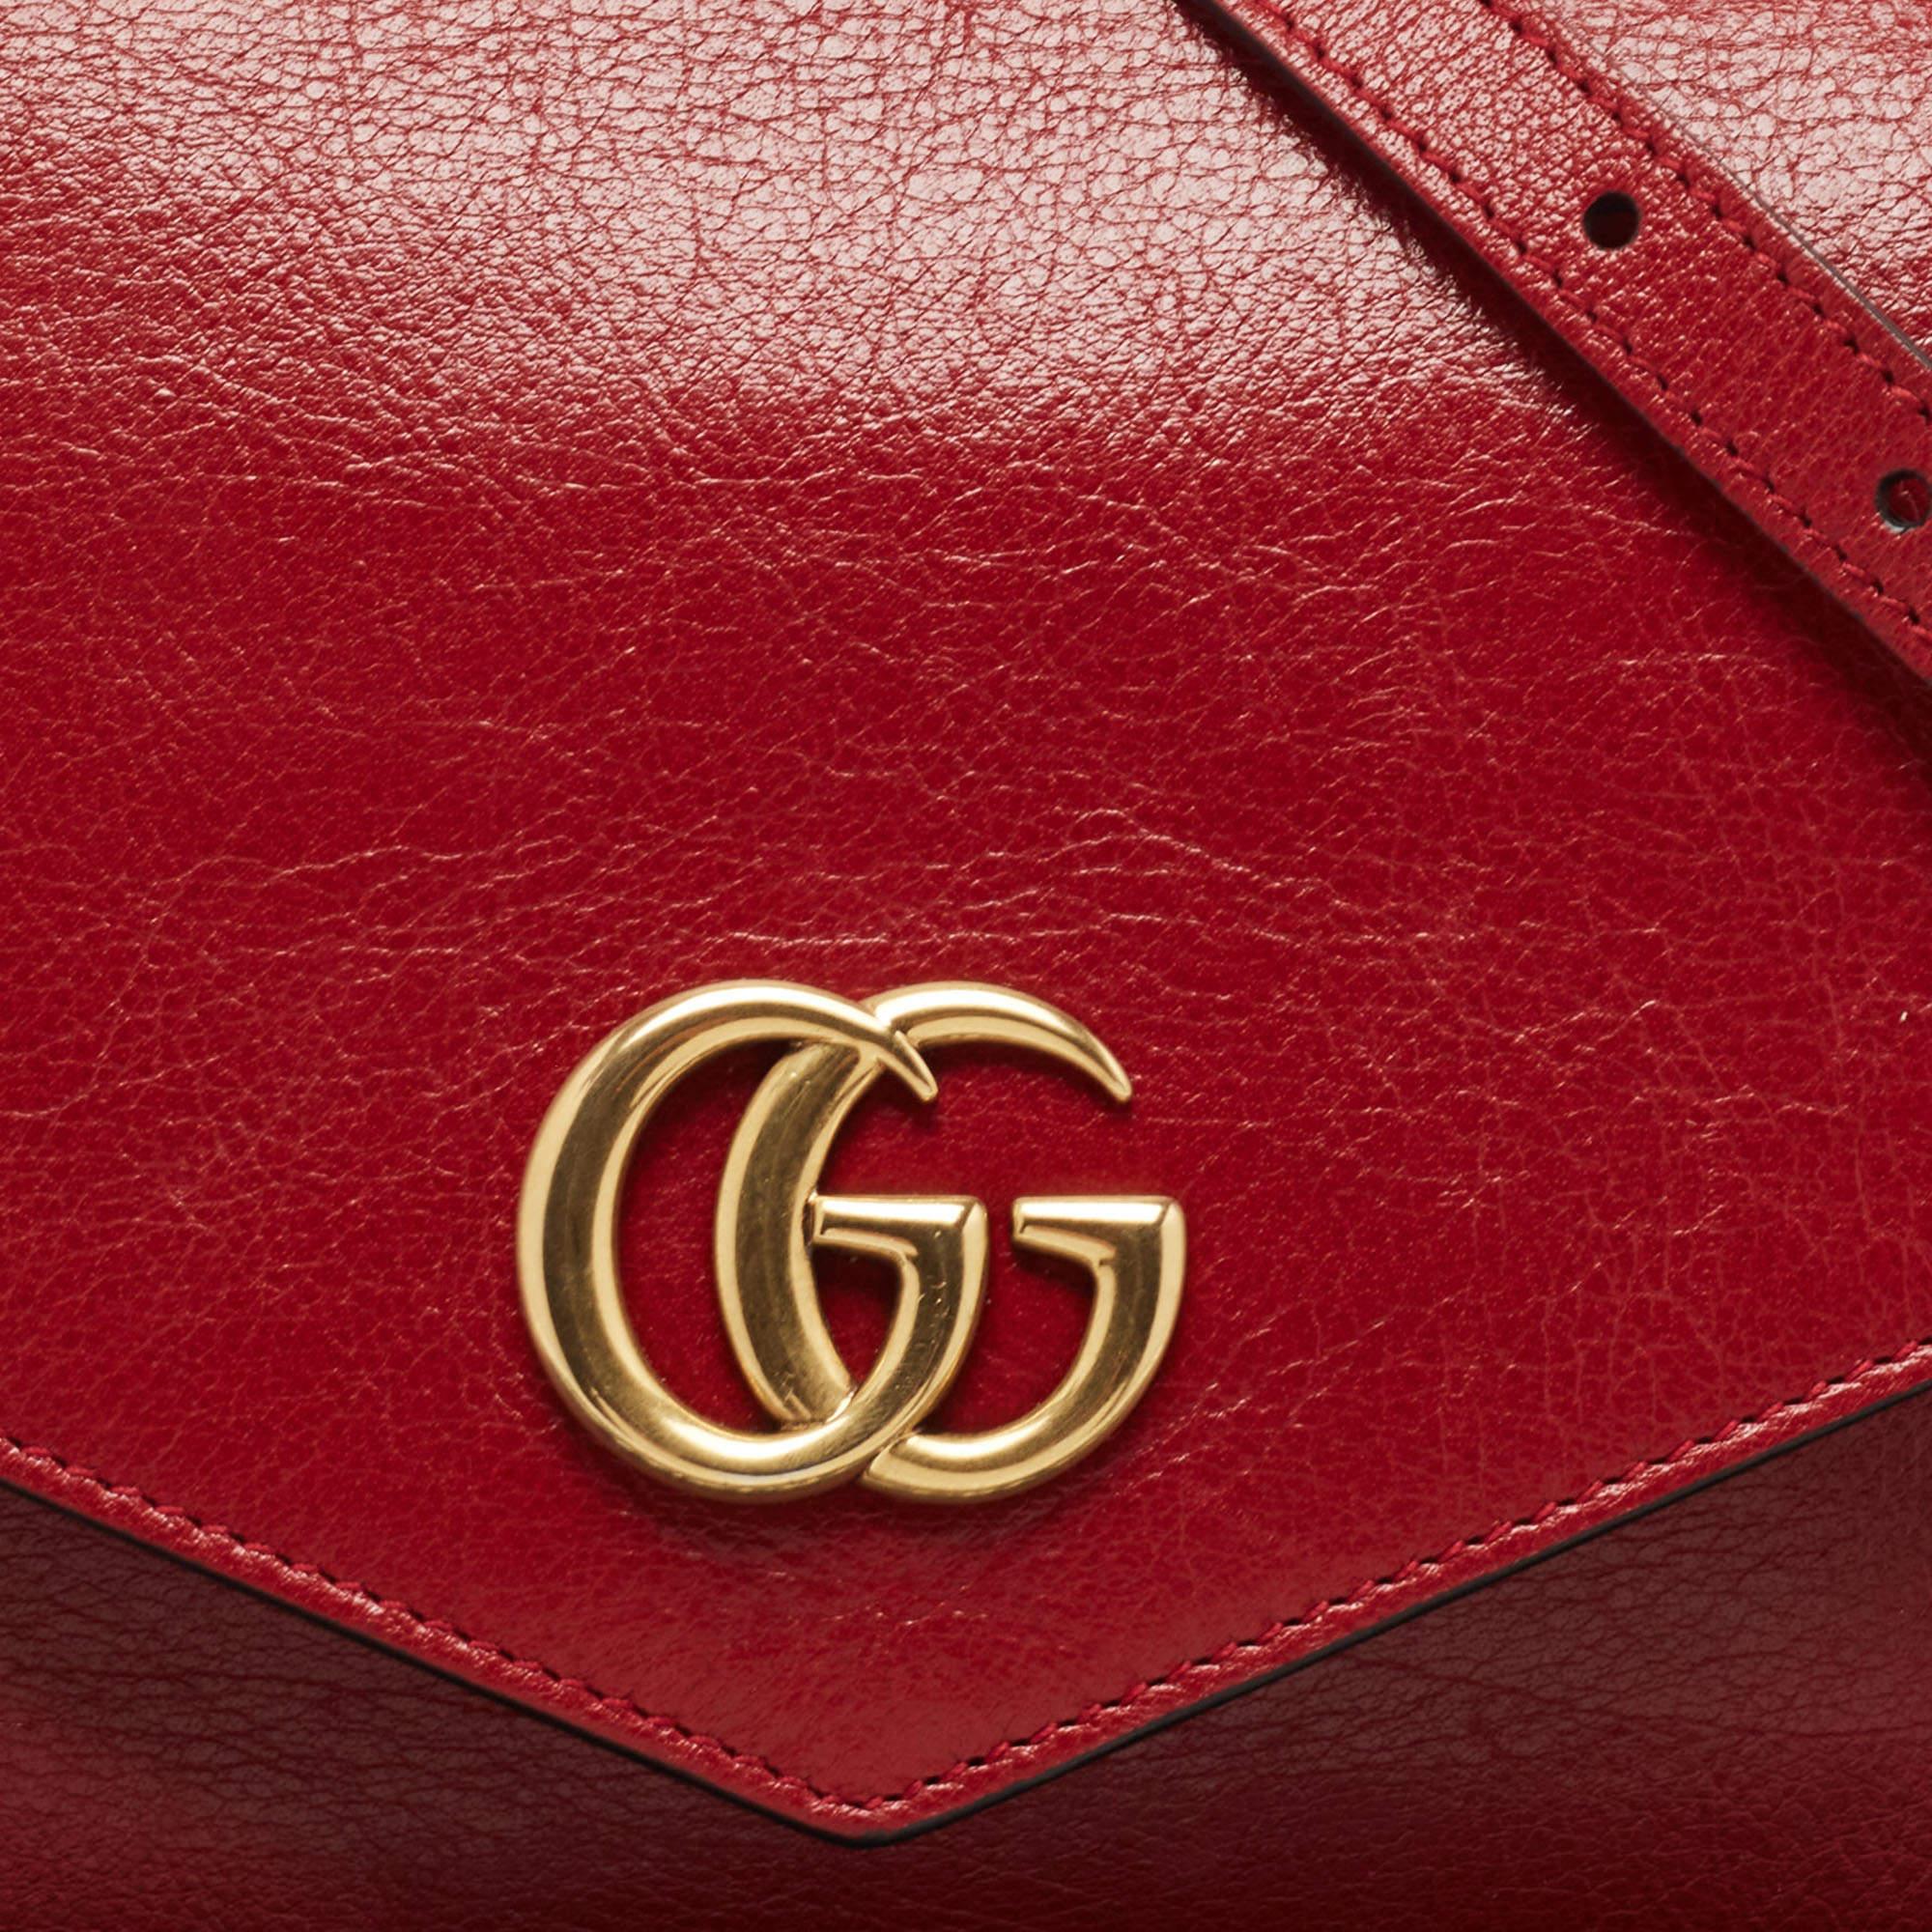 Gucci Black and Red Leather Thiara Bag 12